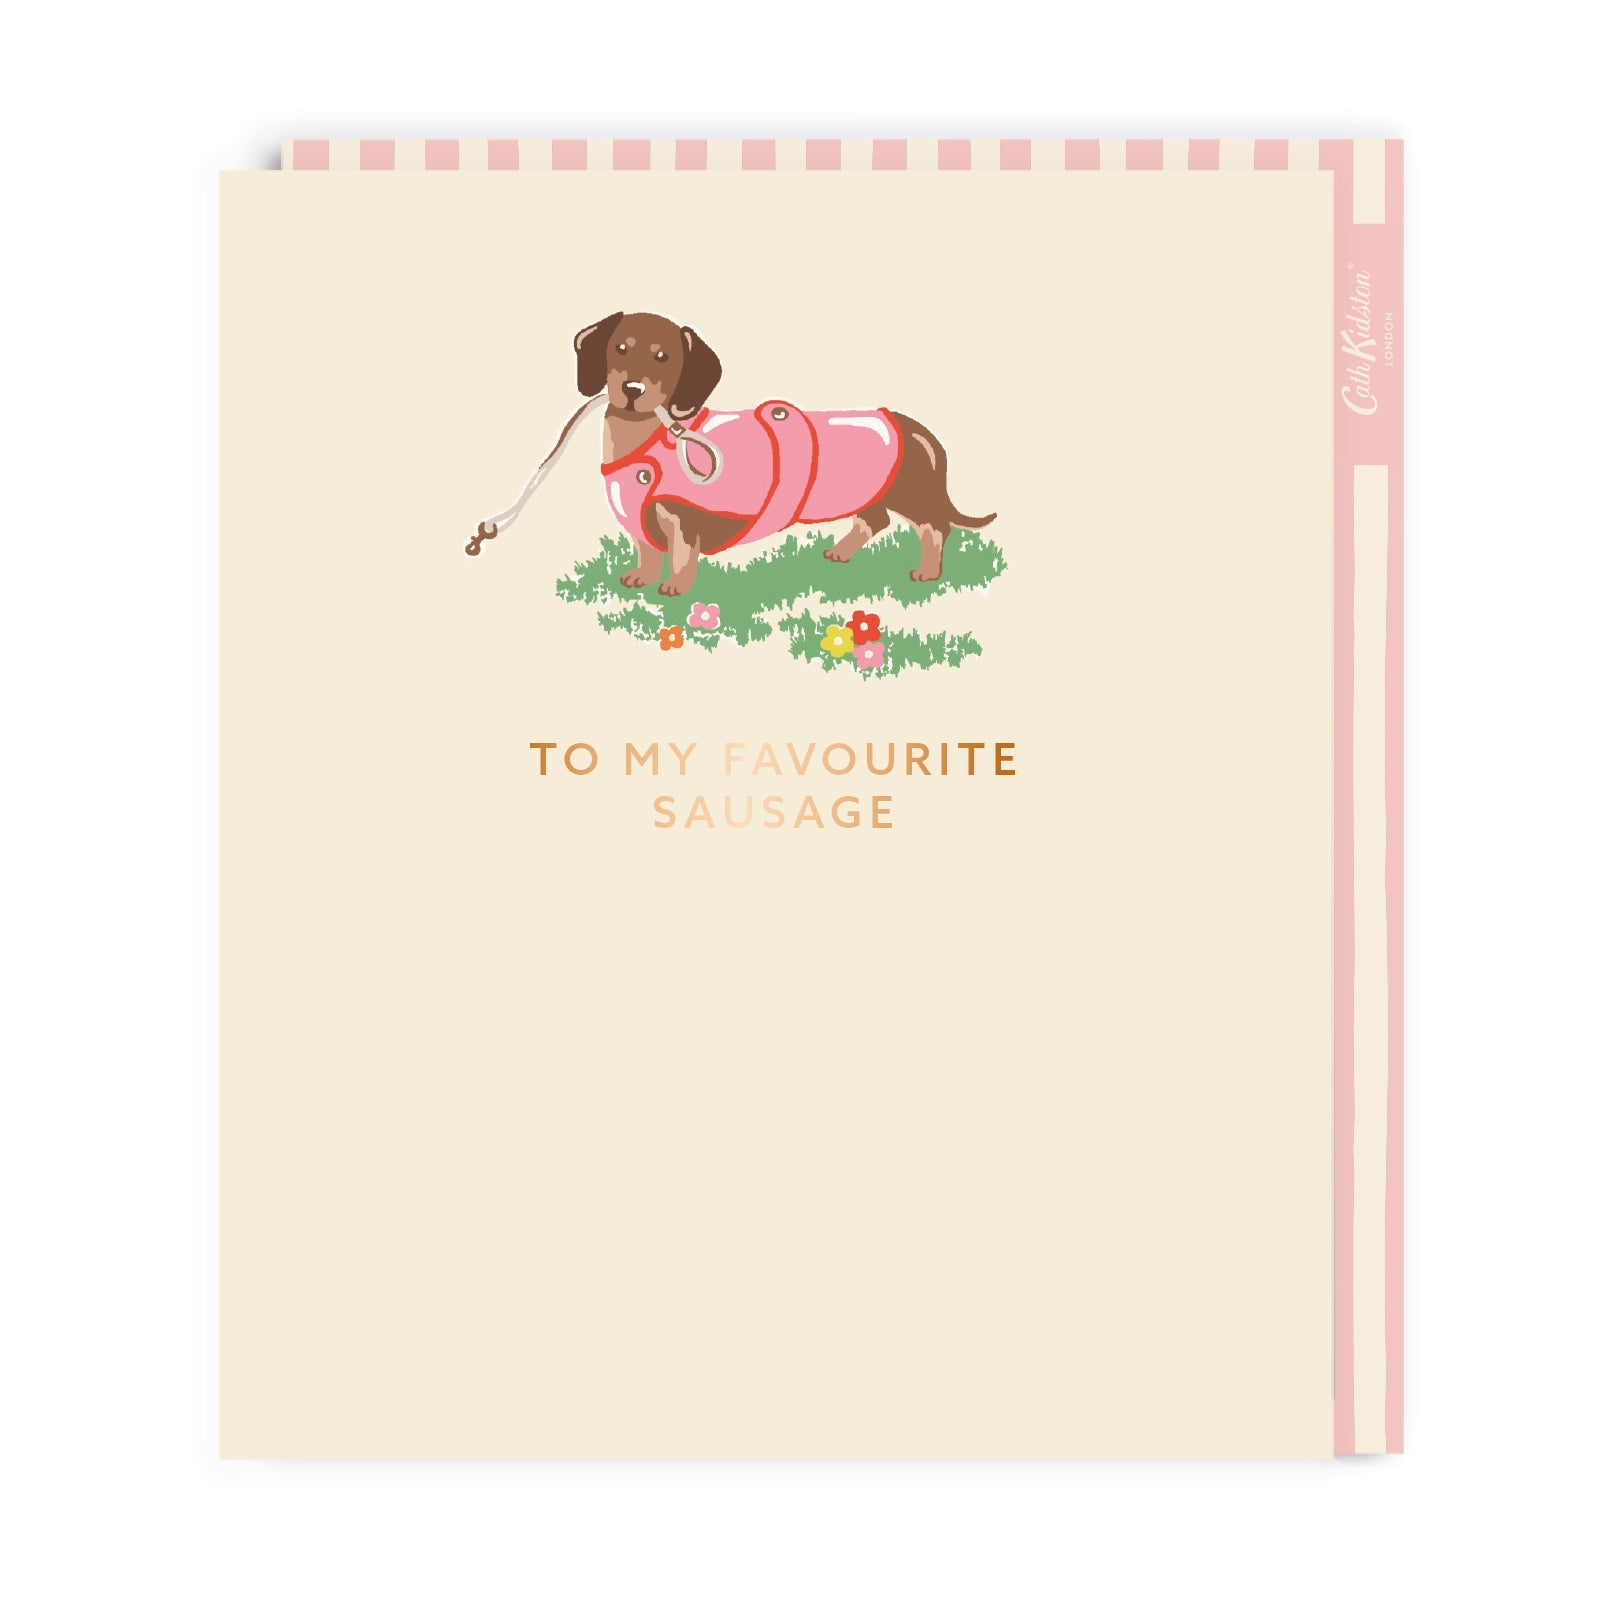 Valentine’s Day | Cute Valentines Card For Dog Lovers | To My Favourite Sausage Large Greeting Card | Cath Kidston Unique Valentine’s Card for Him or Her | Made In The UK, Eco-Friendly Materials, Plastic Free Packaging